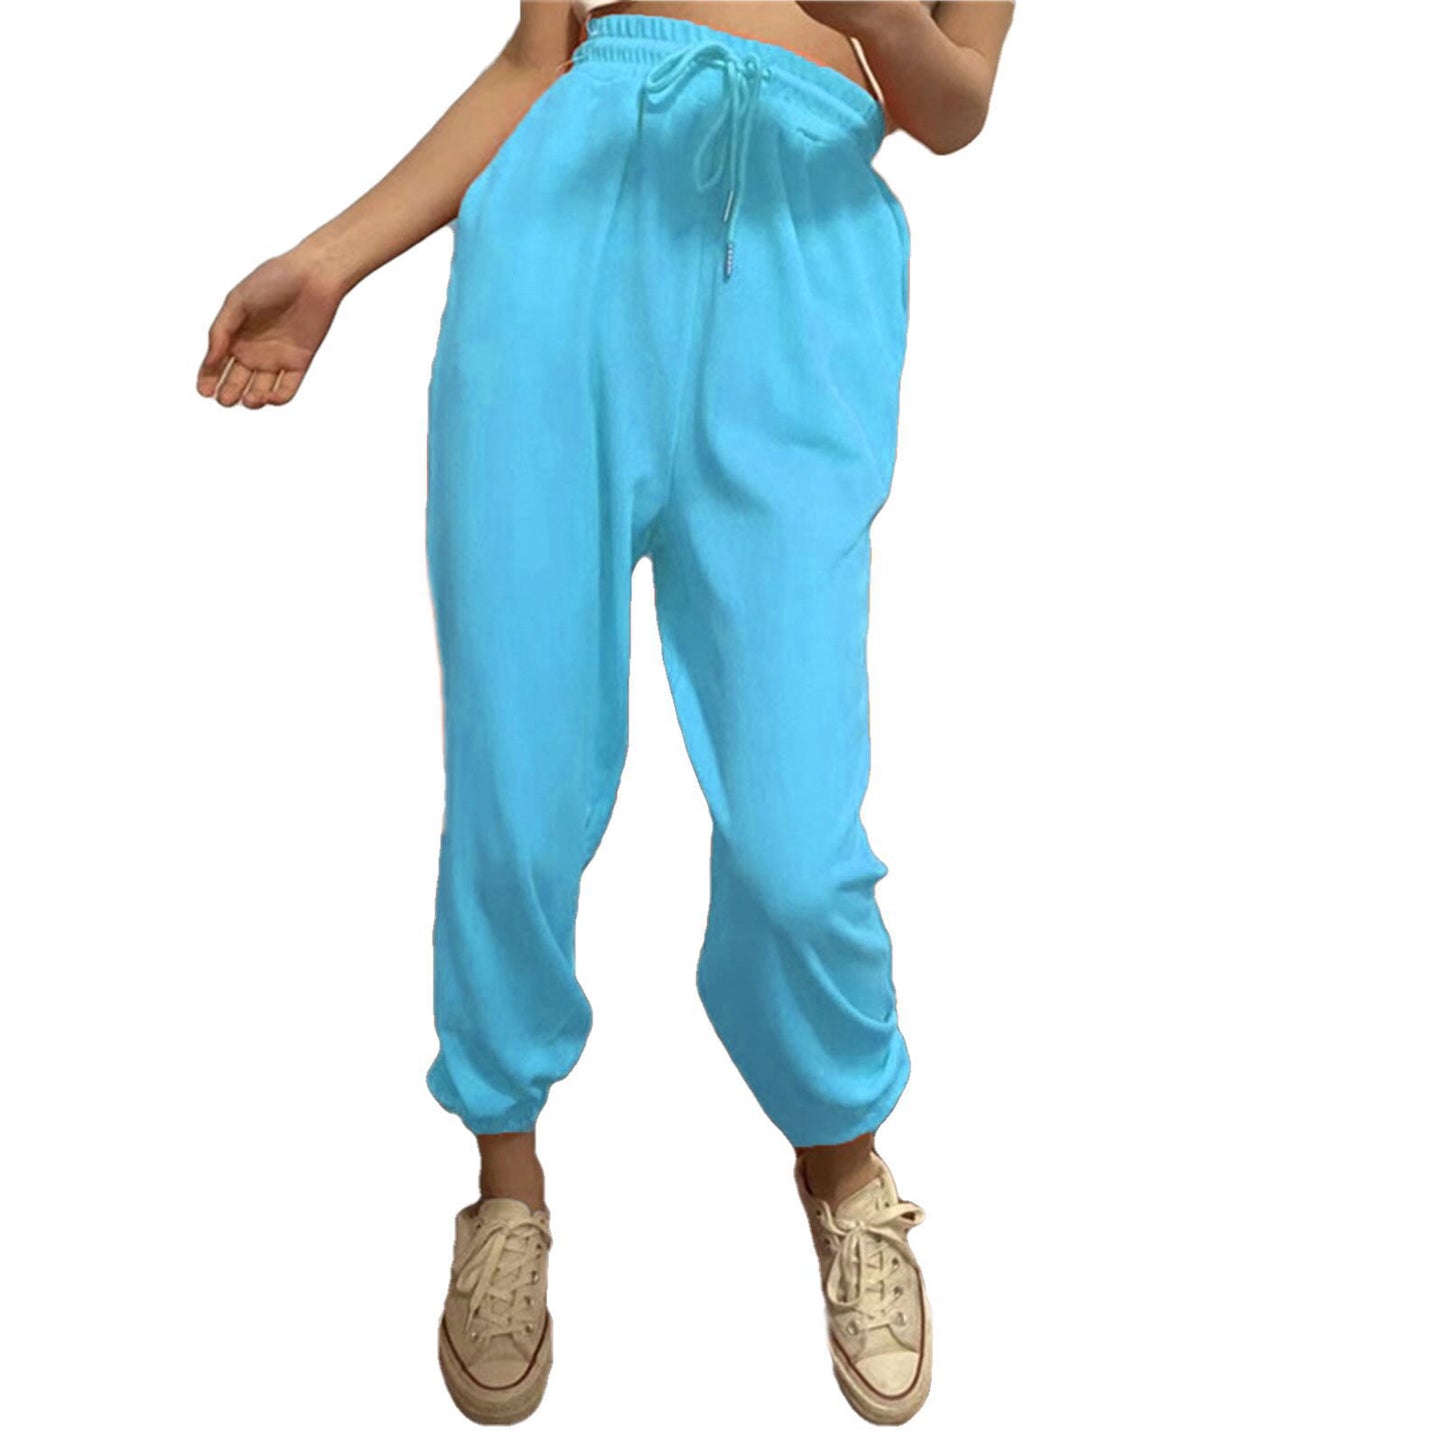 Women's Fashion Solid Color Ankle Banded Pants